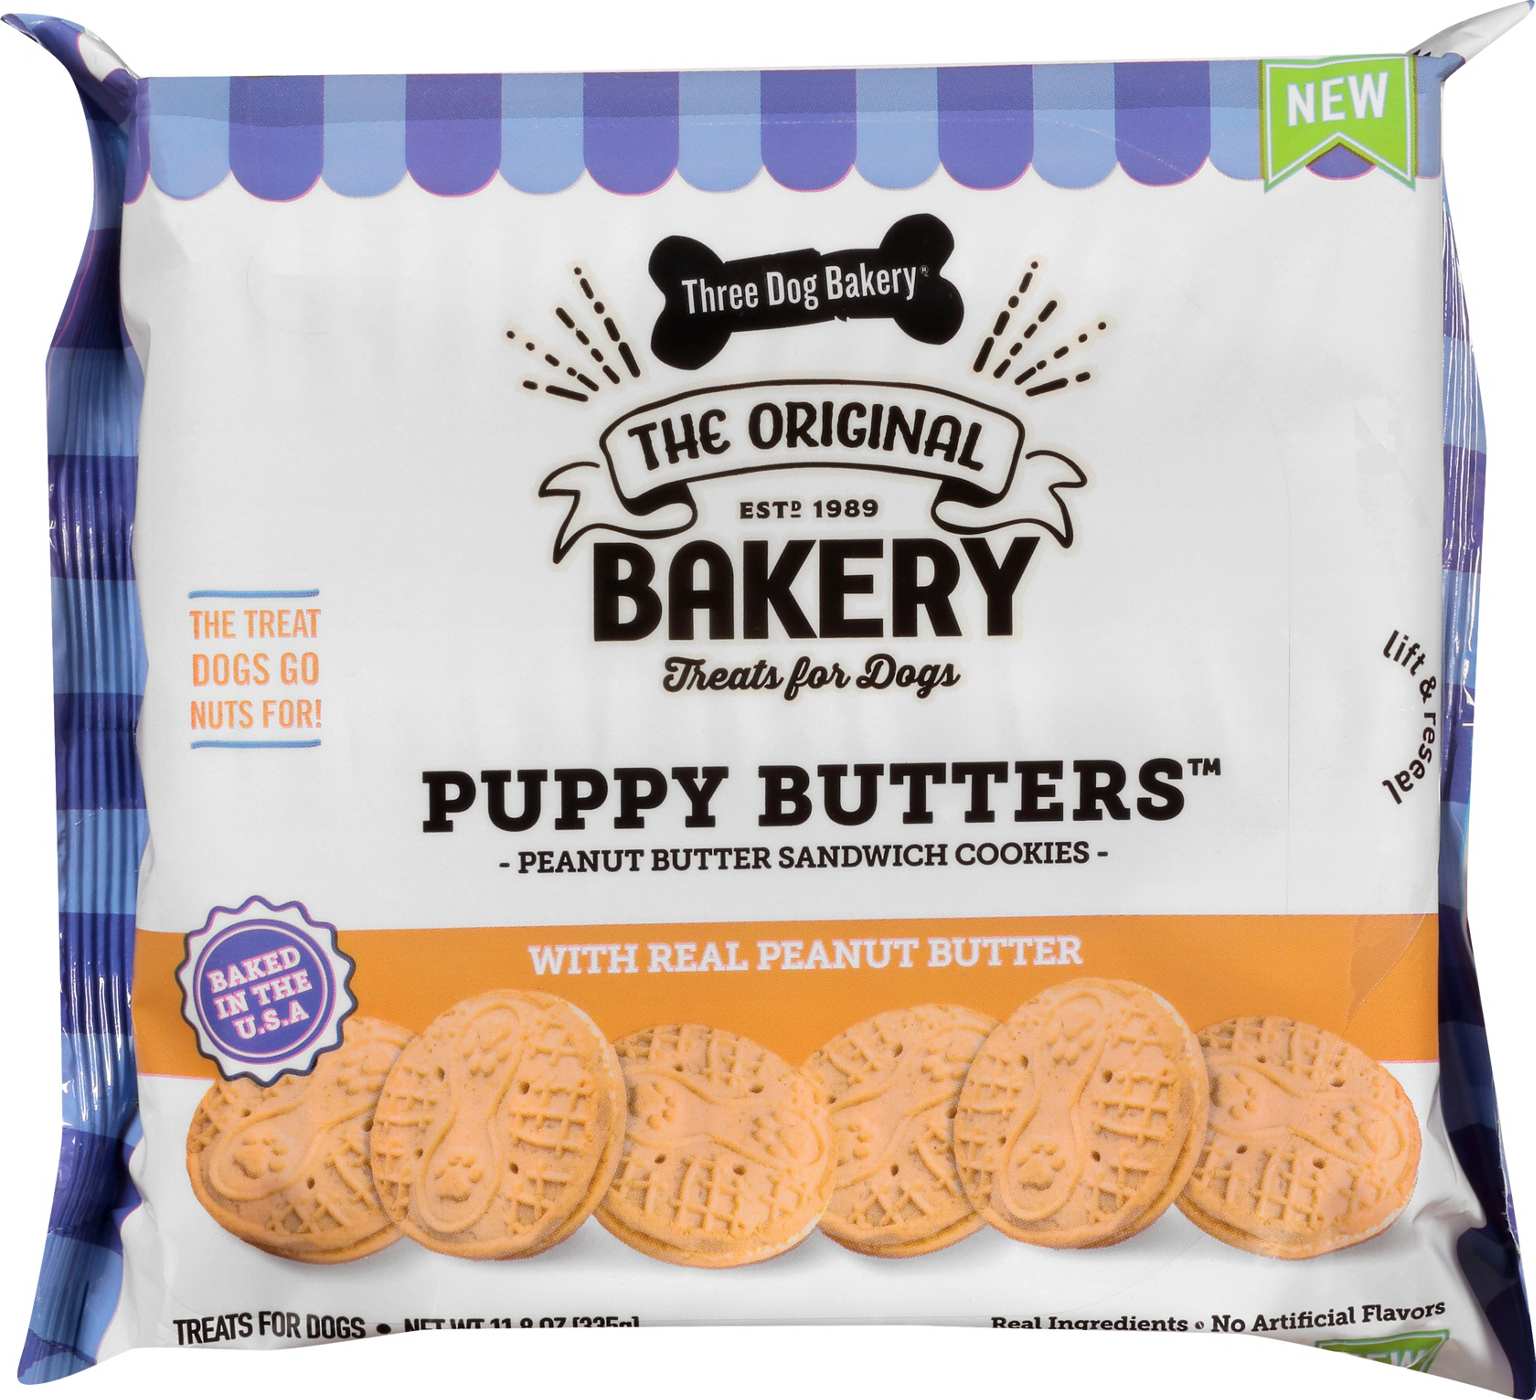 Three Dog Bakery Puppy Butters Peanut Butter Sandwich Cookies Dog Treats; image 1 of 2